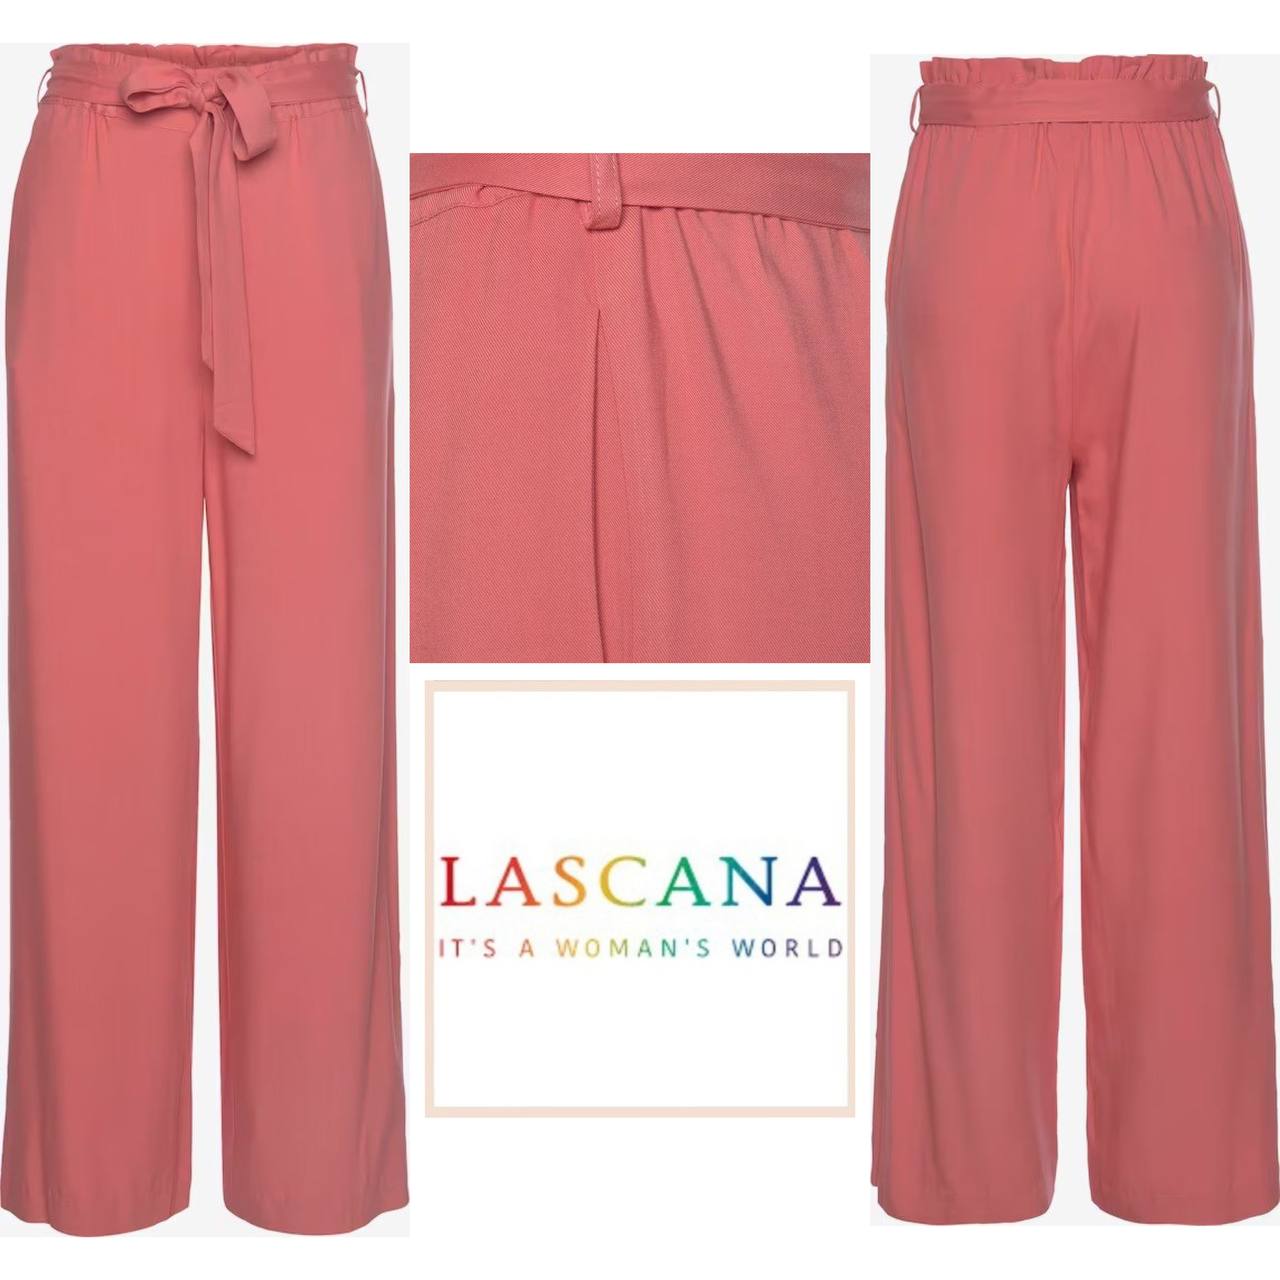 020128 Women's palazzo trousers from Lascana